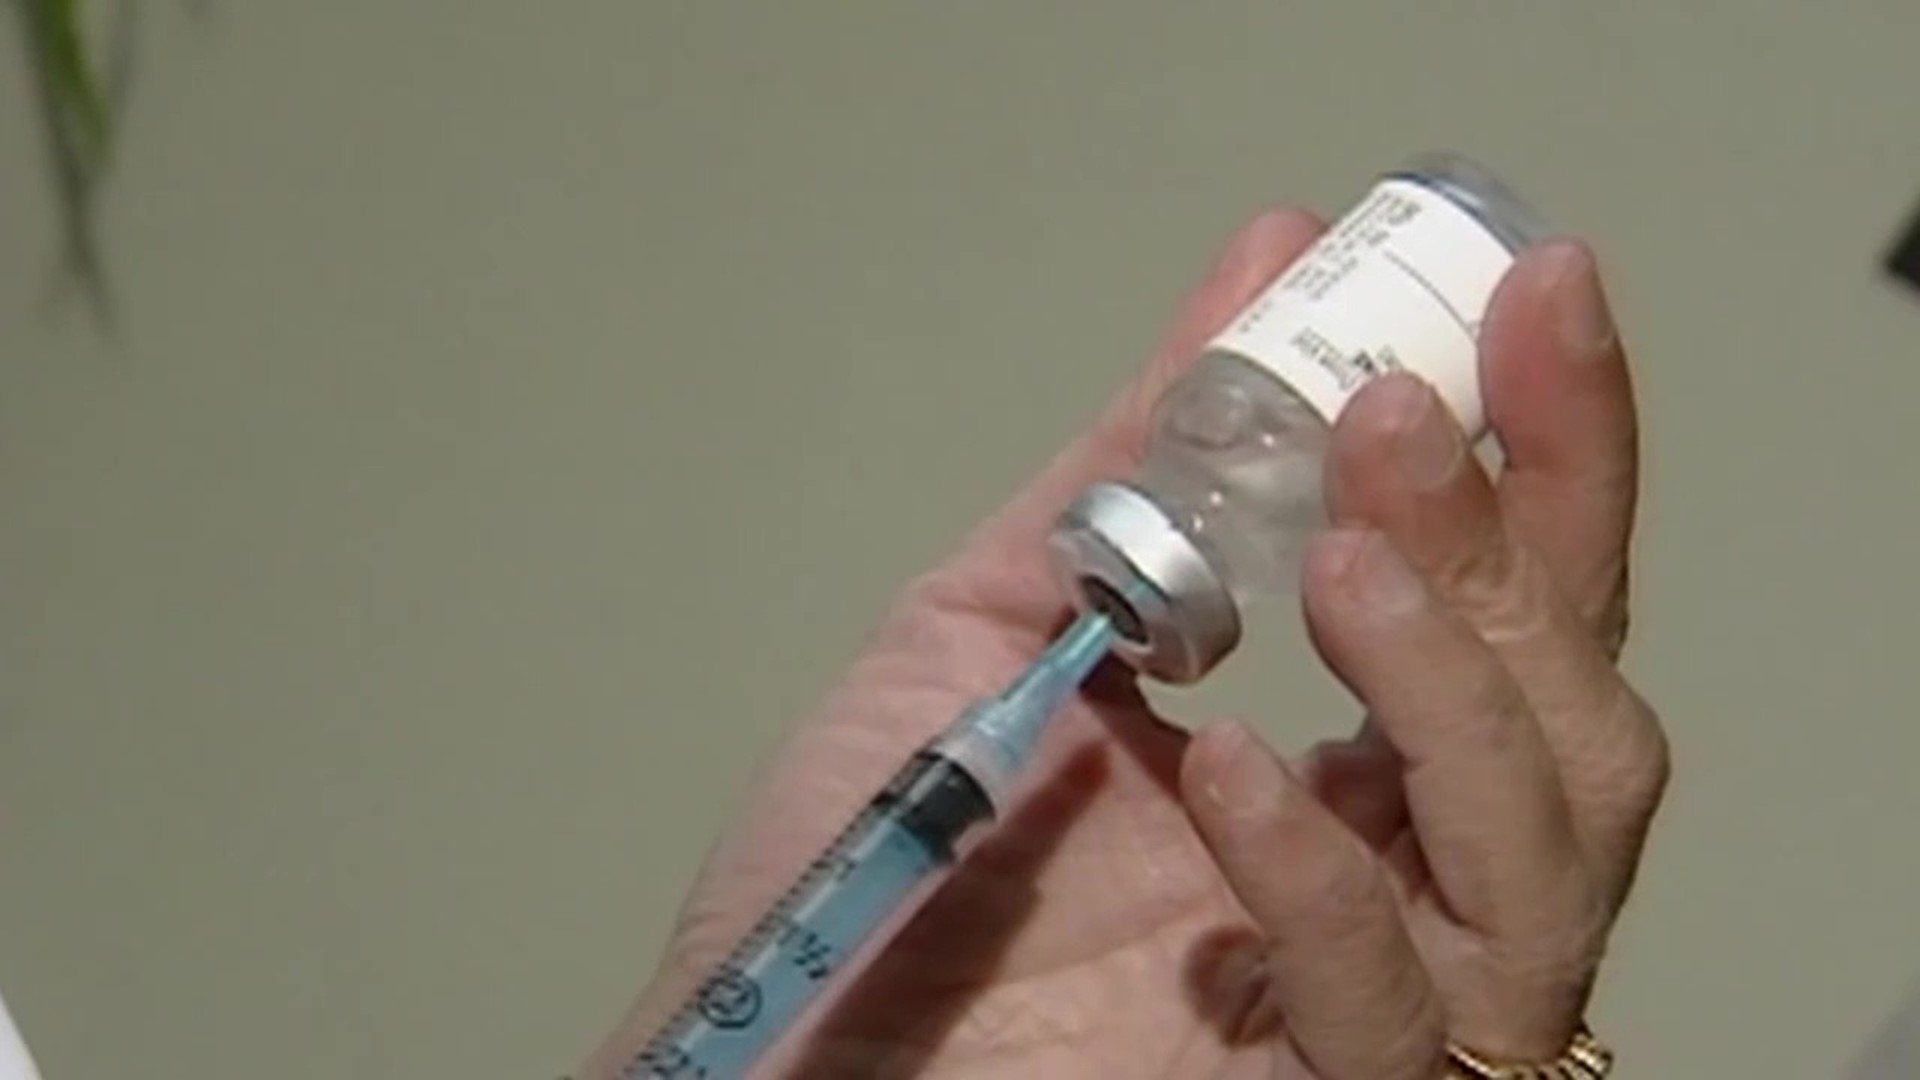 People in Wayne County were happy to hear that 70 percent of adults in the state are fully vaccinated.